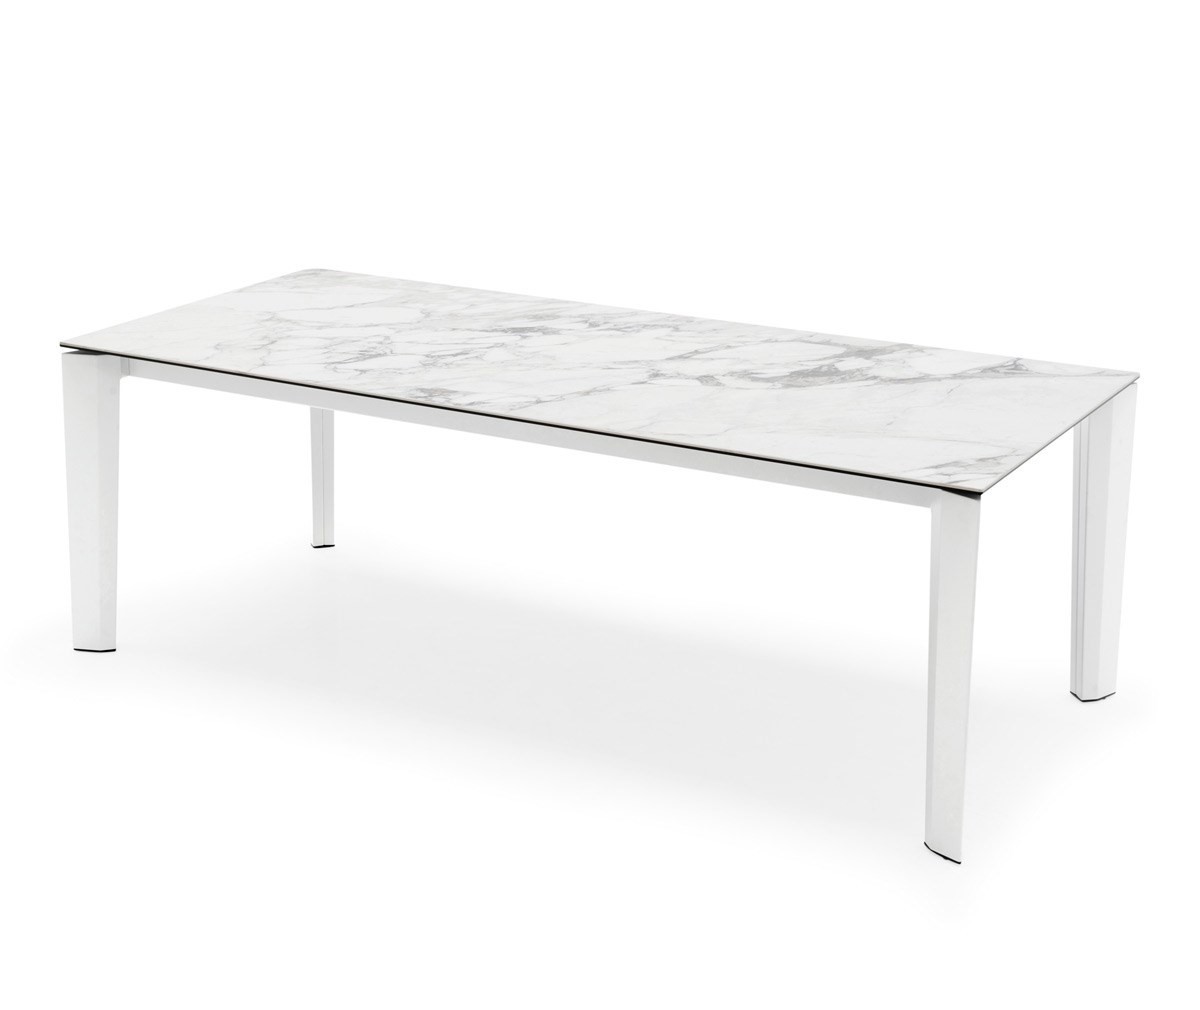 Calligaris Delta Extendable Dining Table Ceramic Marble/White, 100 x 220/280 cm